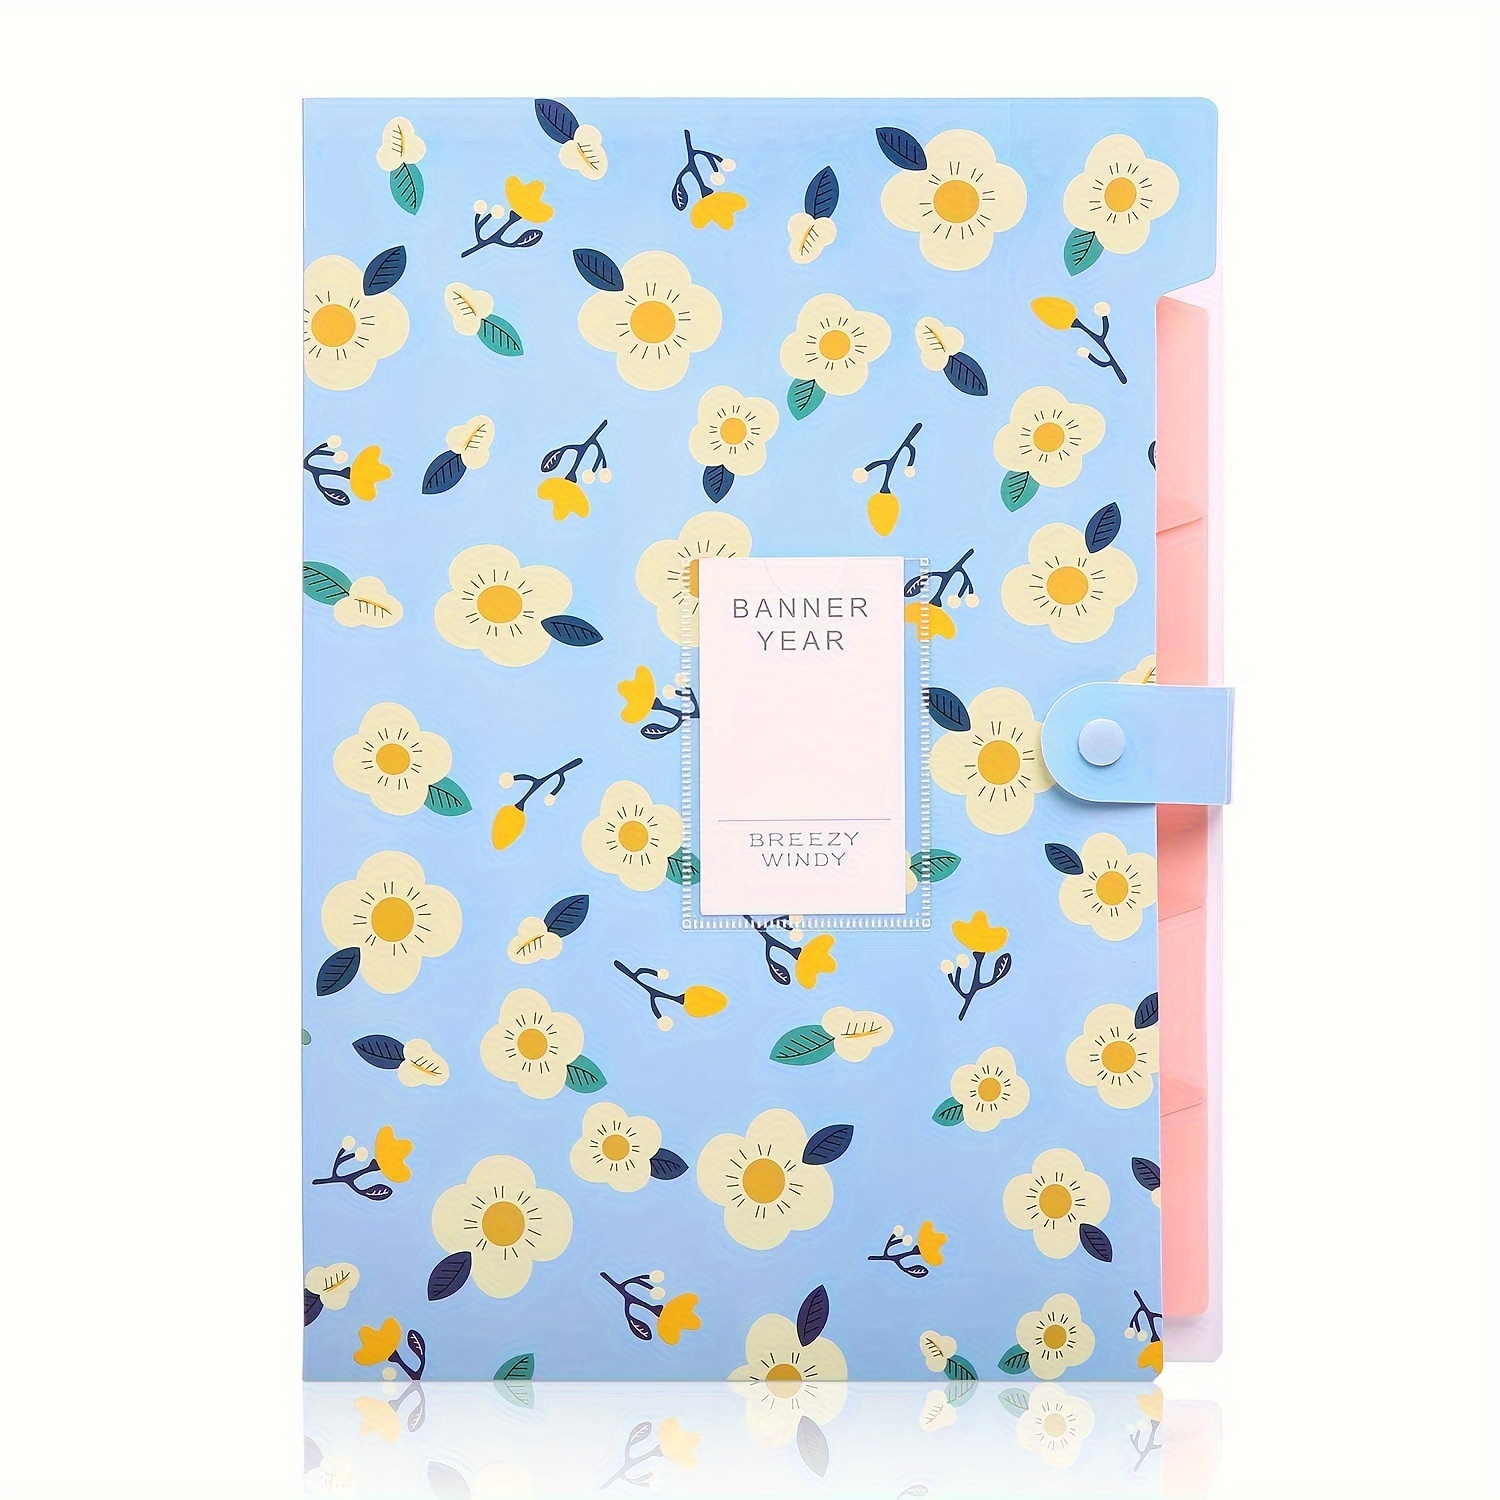 

Floral Pp Expanding File Folder With 6 Pockets - Waterproof And Acid-free A4/letter Size Accordion Document Organizer With Snap Closure - Durable, Non-toxic Blue Flower Design Storage Binder